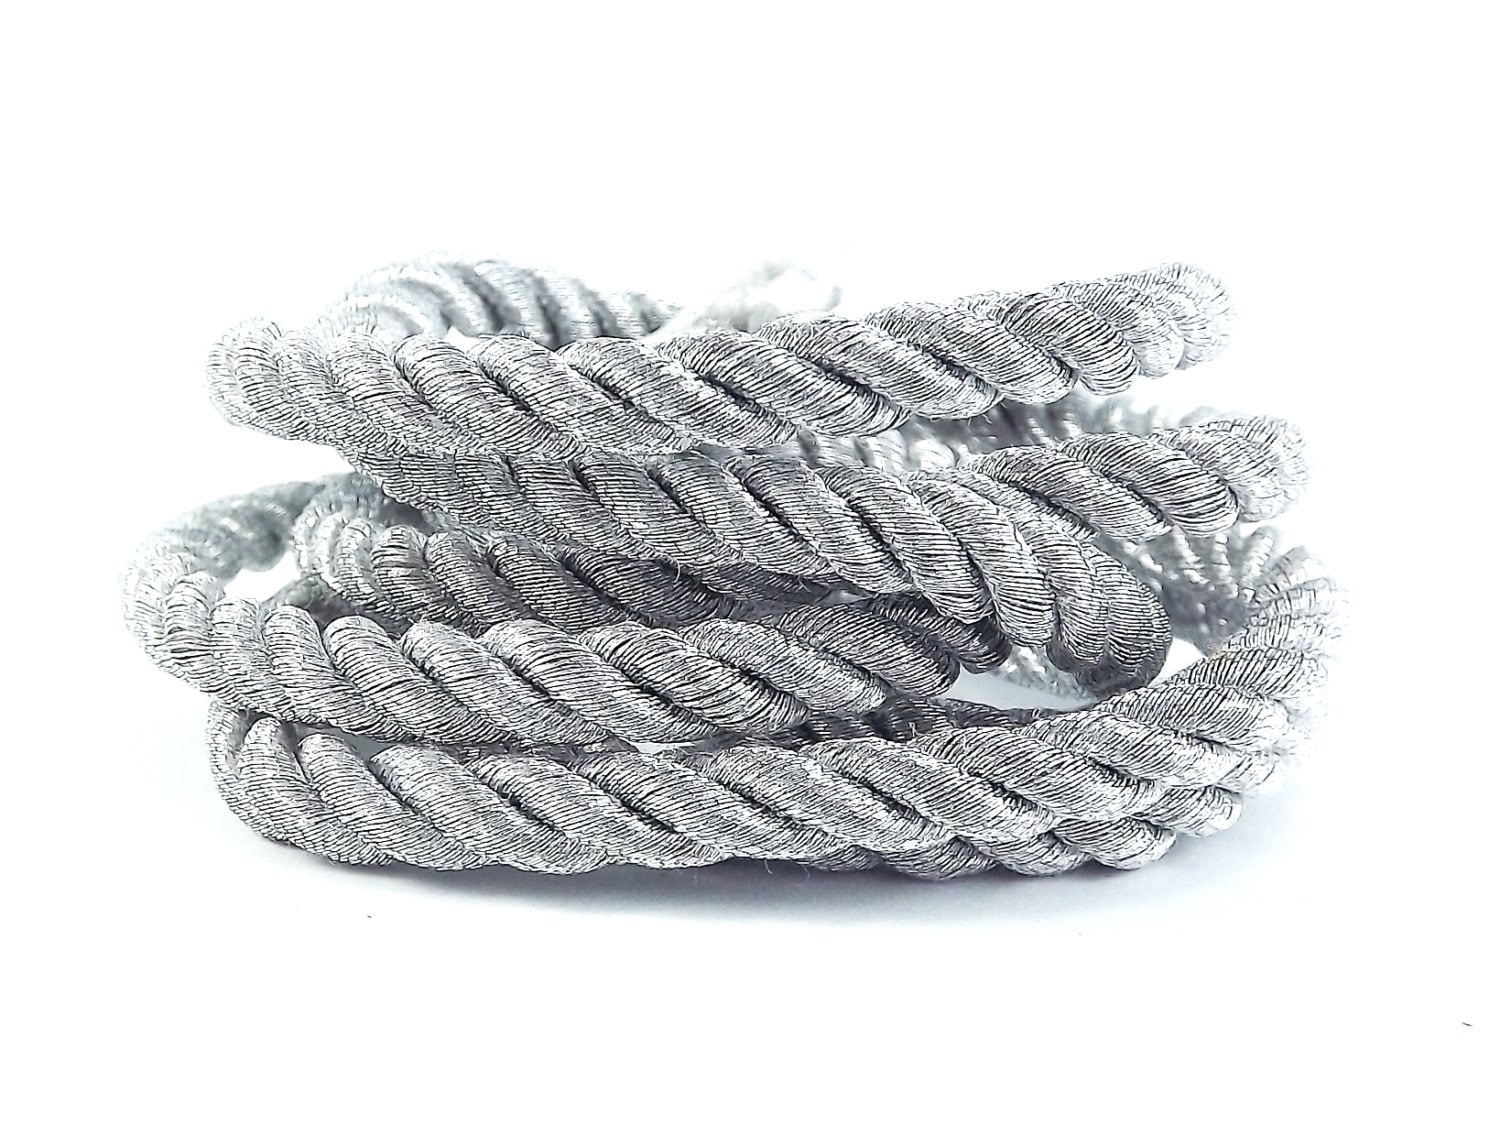 Metallic Silver Rope, 5mm Rope, Twisted Rope, Rayon Rope, Braid